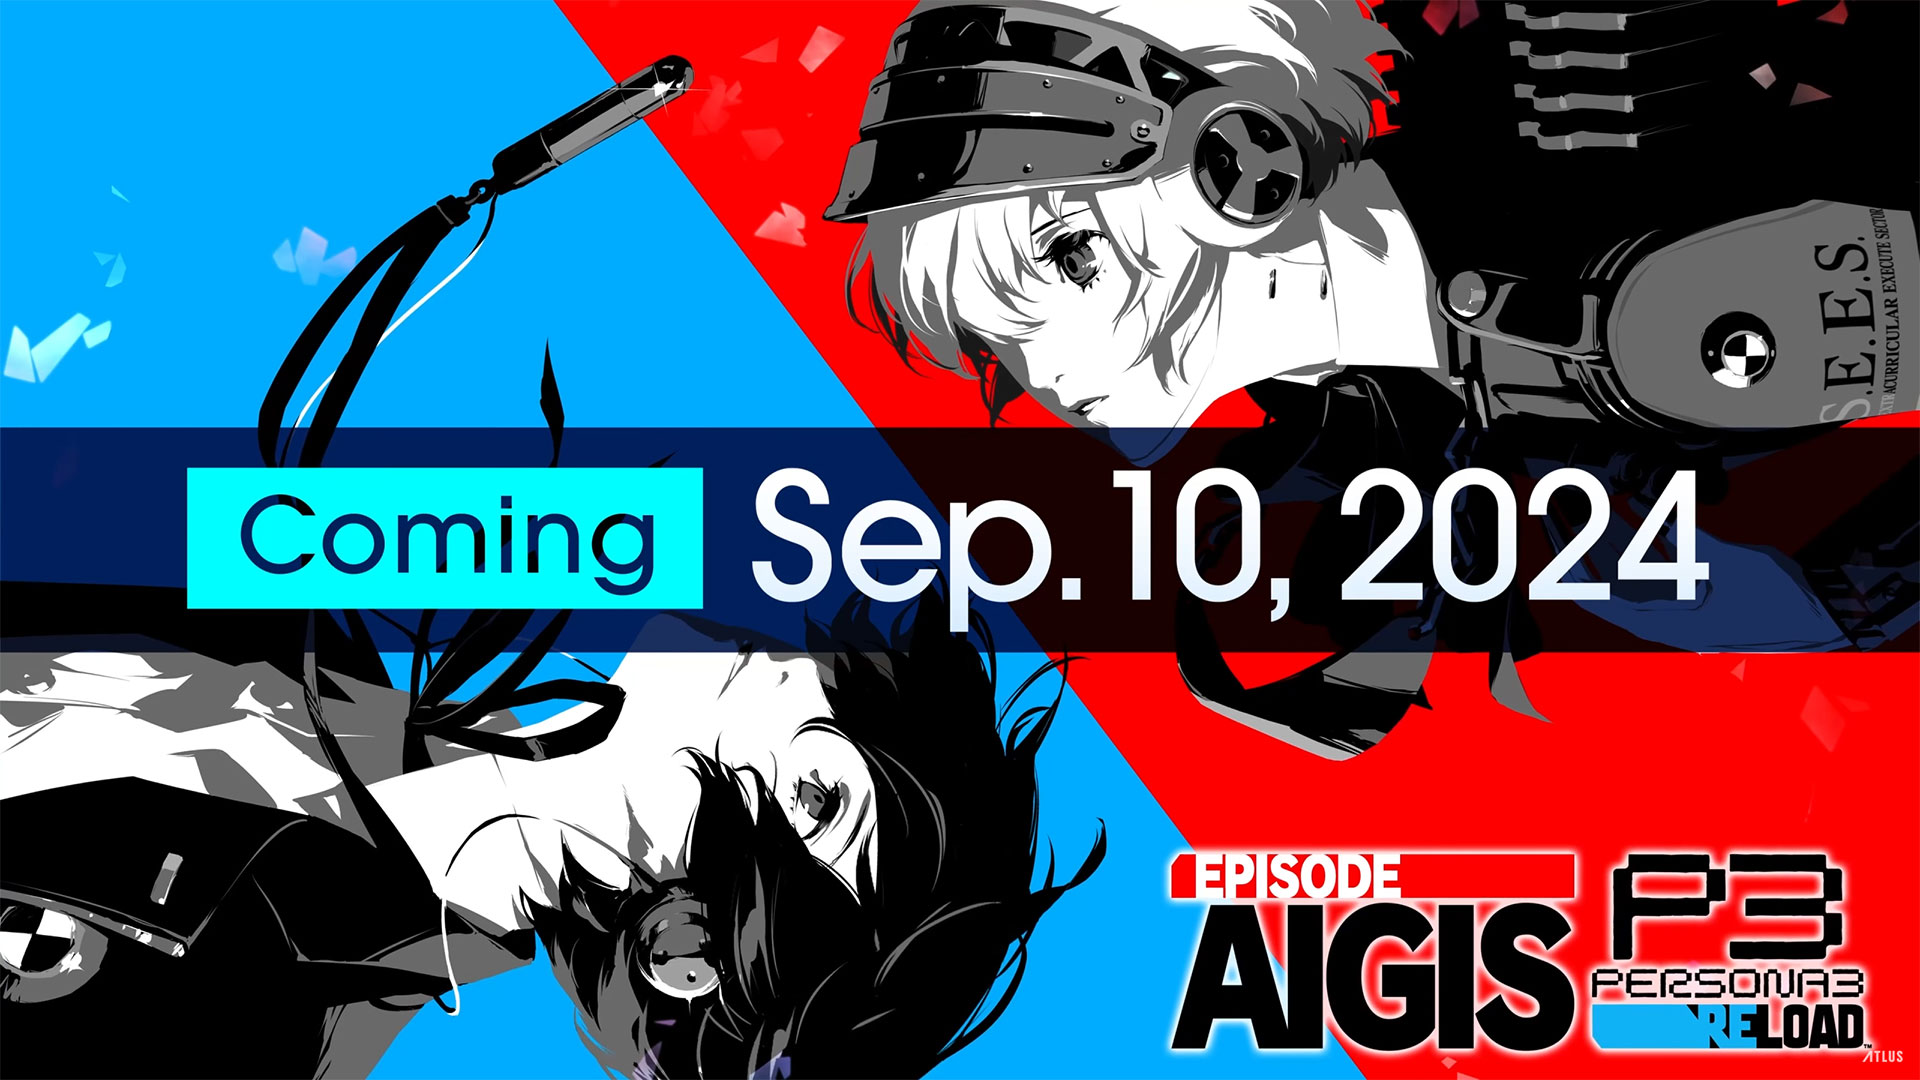 Persona 3 Reload's Episode Aigis goes live on September 10